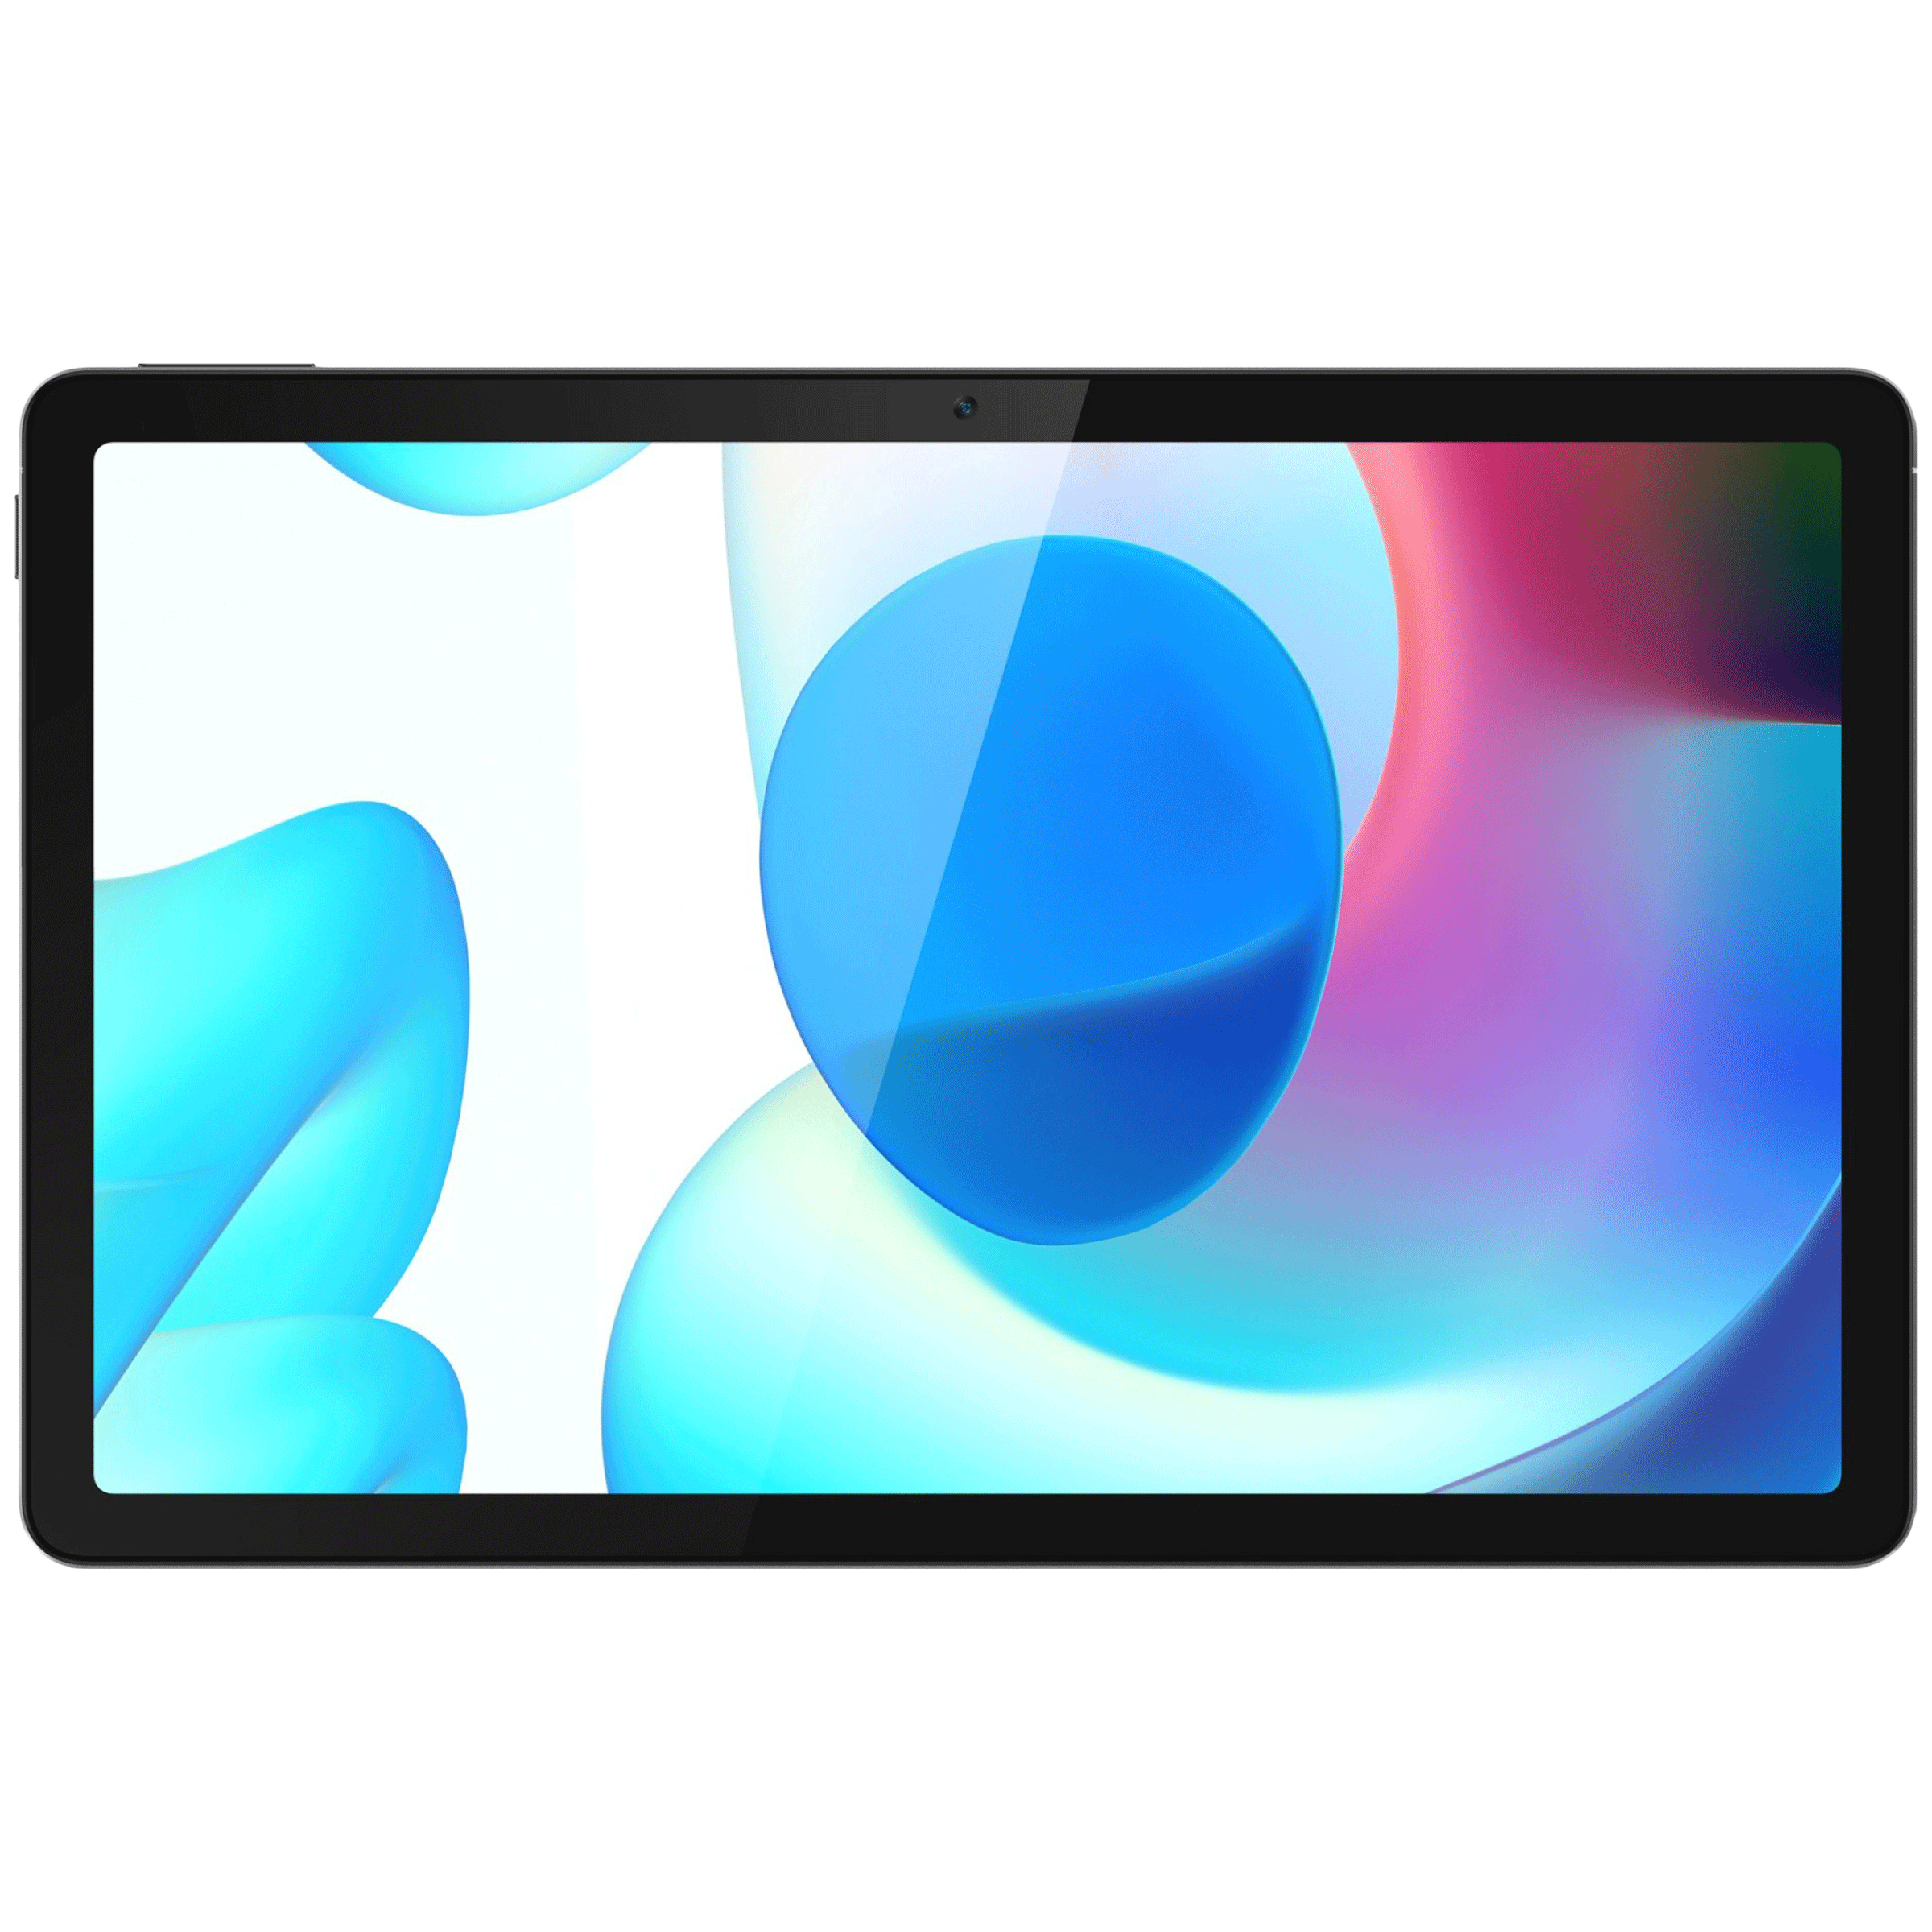 realme - realme Pad WiFi Android Tablet (Android 11, MediaTek, Helio G80, 26.42cm (10.4 Inches), 3GB RAM, 32GB ROM, RMP2103, Grey)